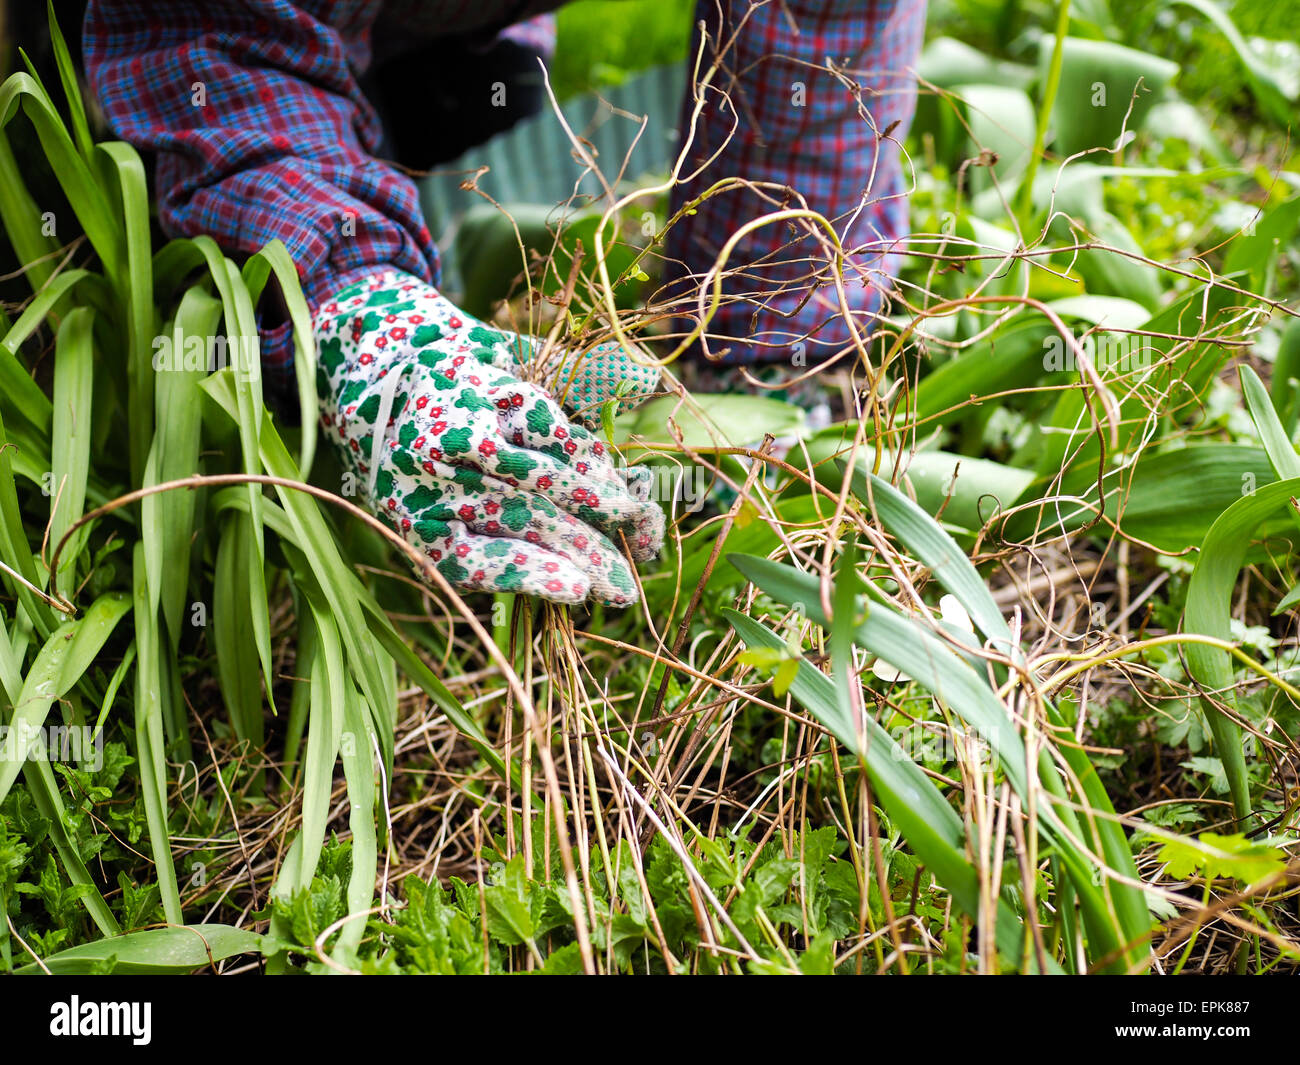 Woman weeding in the garden and she use protective gloves Stock Photo